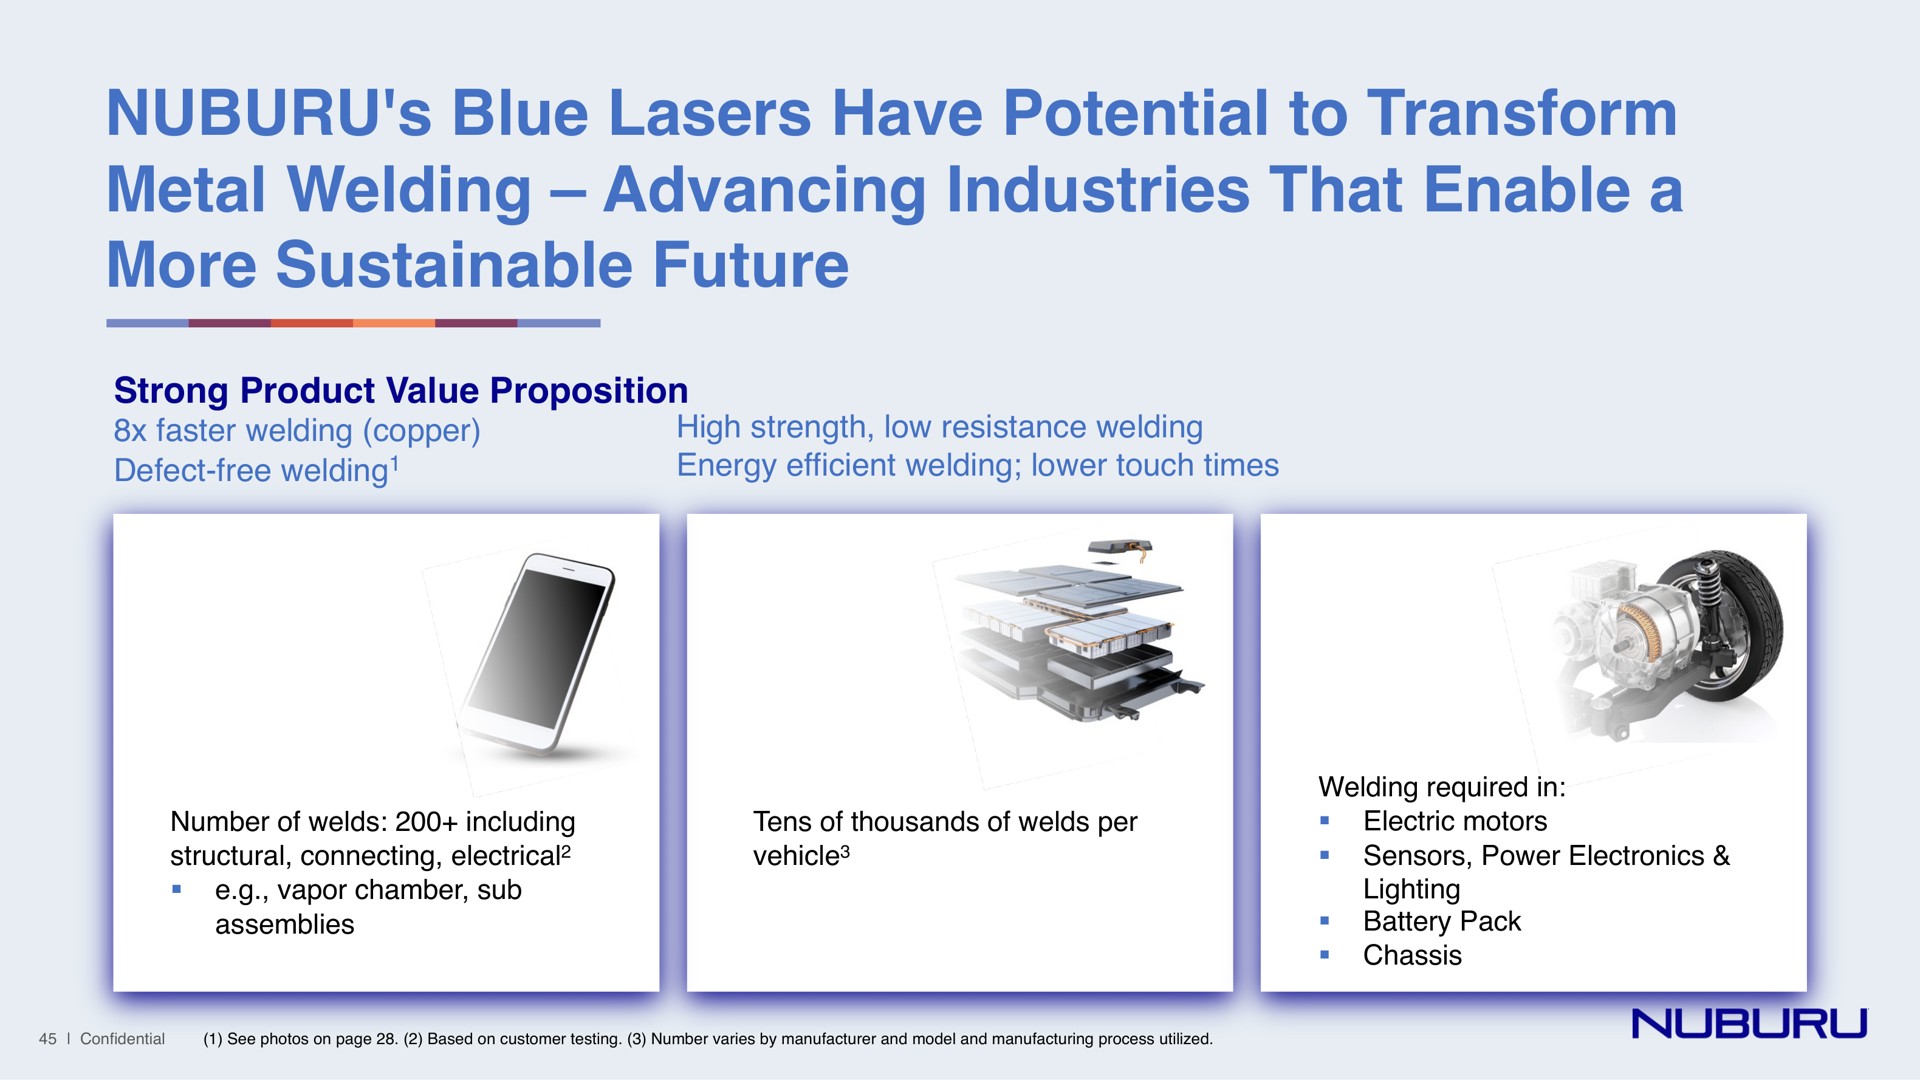 blue lasers have potential to transform metal welding advancing industries that enable a more sustainable future | NUBURU